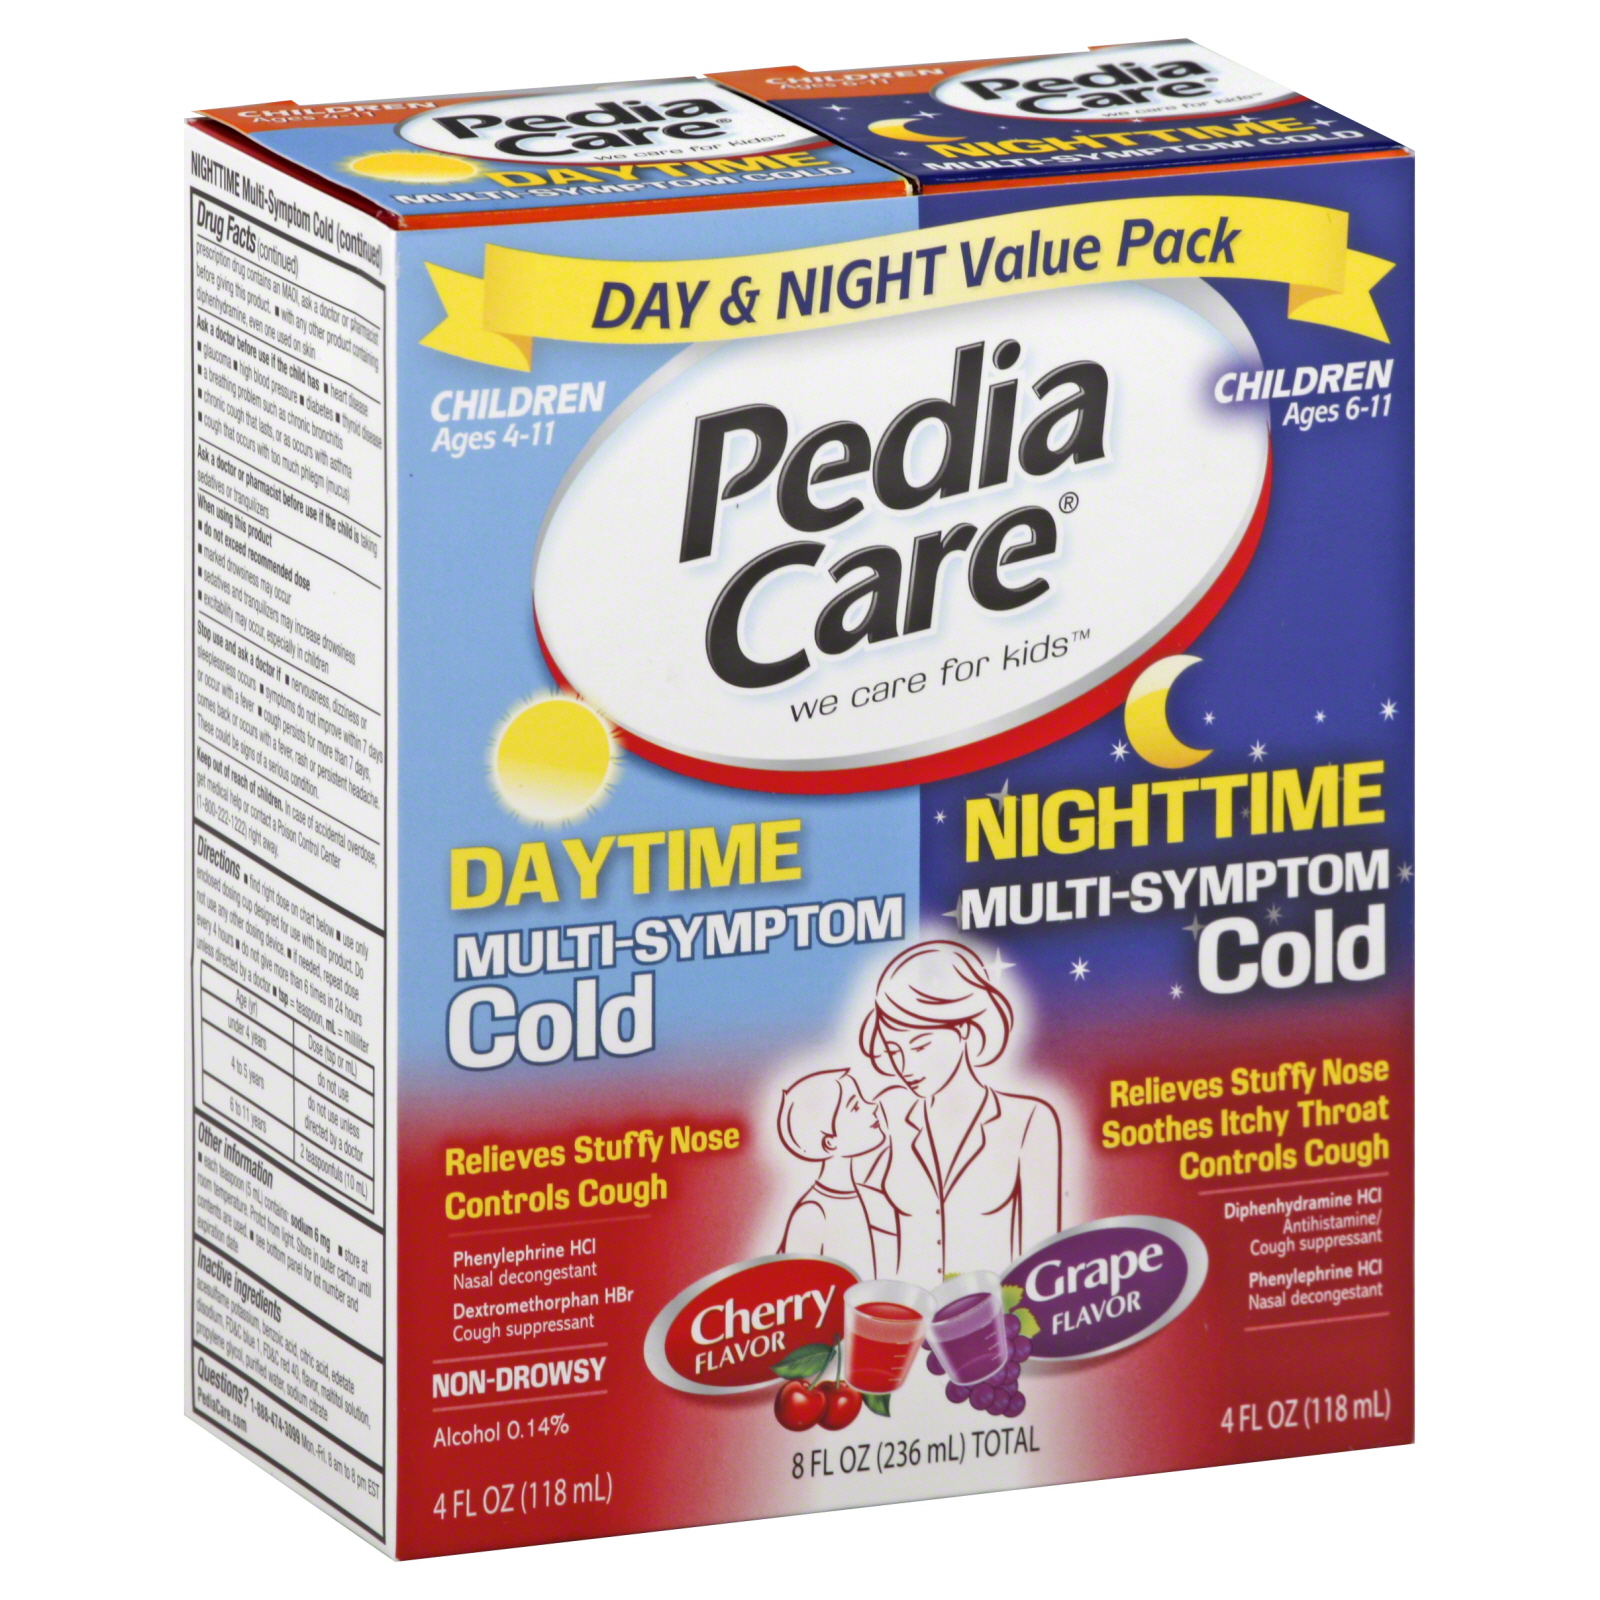 PediaCare Multi Symptom Cold Daytime And Nighttime Value Pack Cherry And Grape